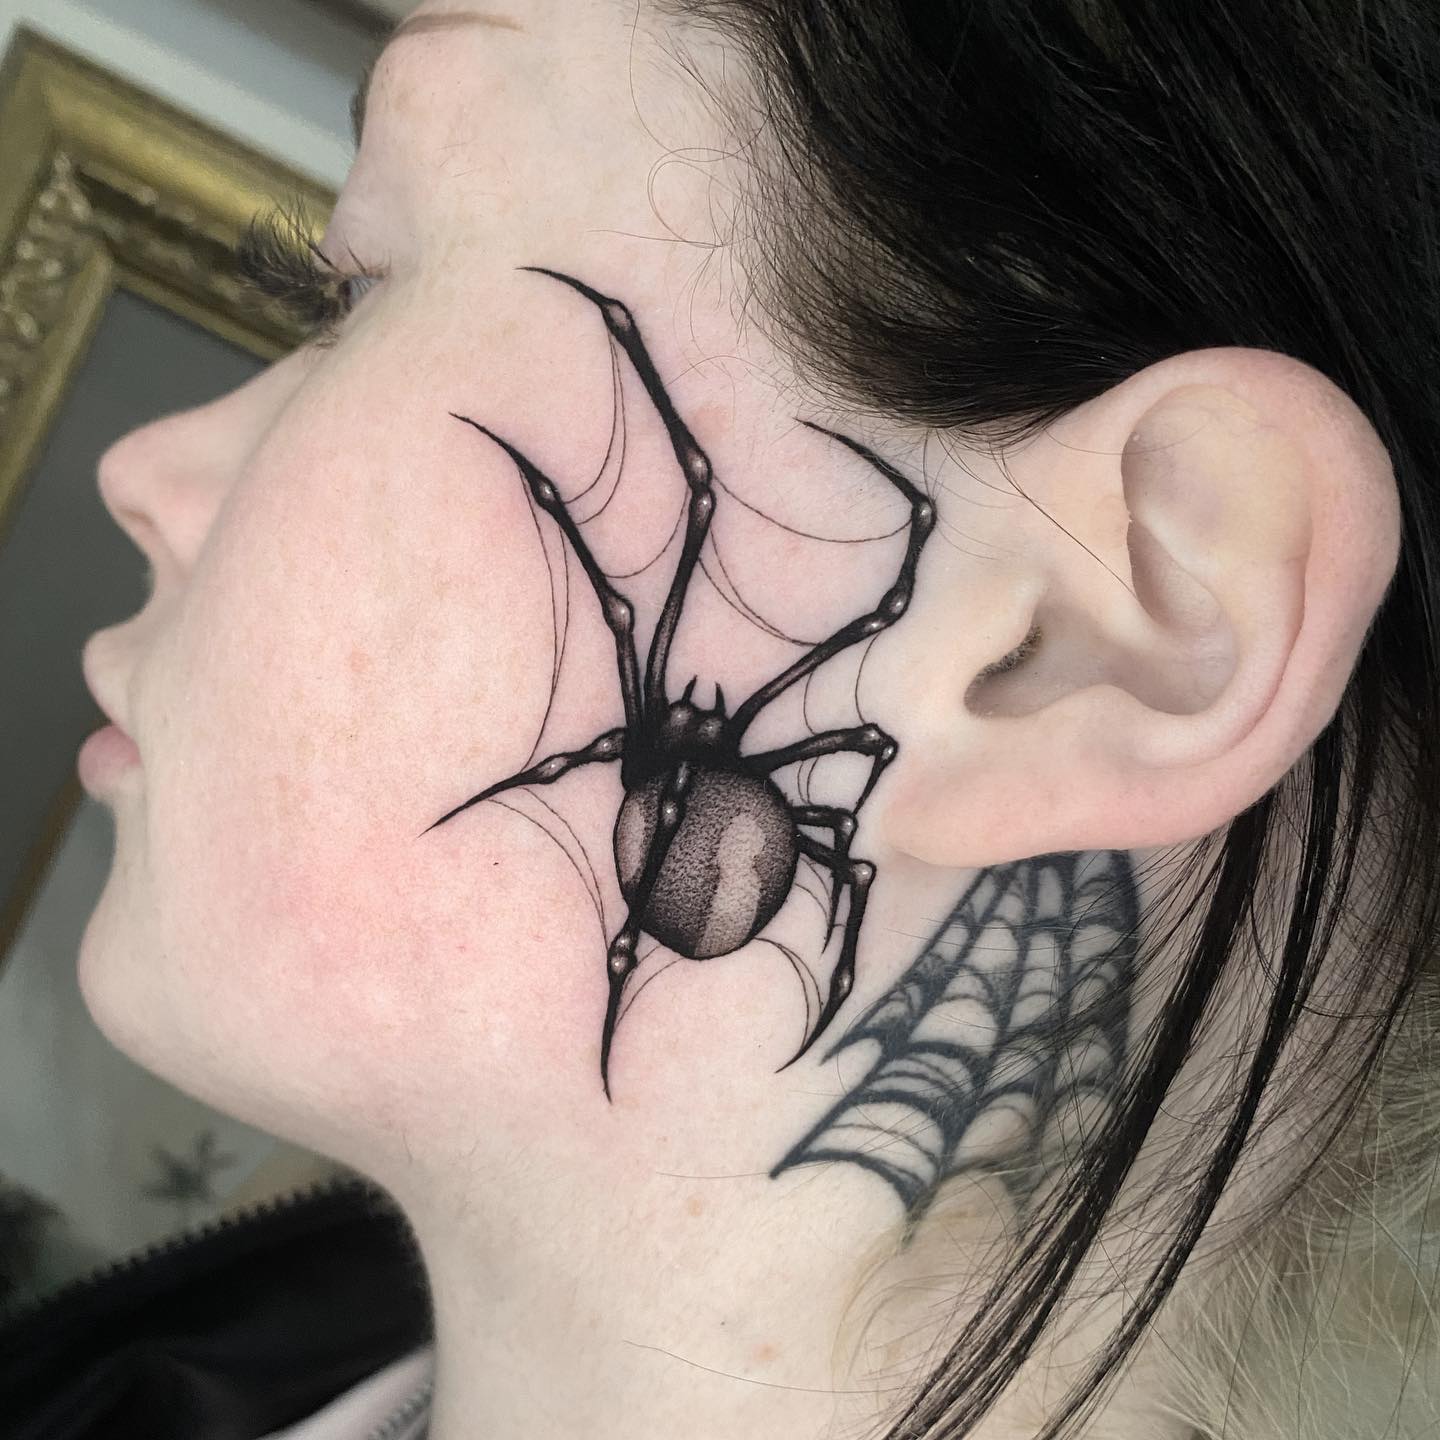 Spiders symbolize fear and dark energy. If you wish to look bold and you want to assert dominance everywhere you go, this tattoo will get a ton of recognition.